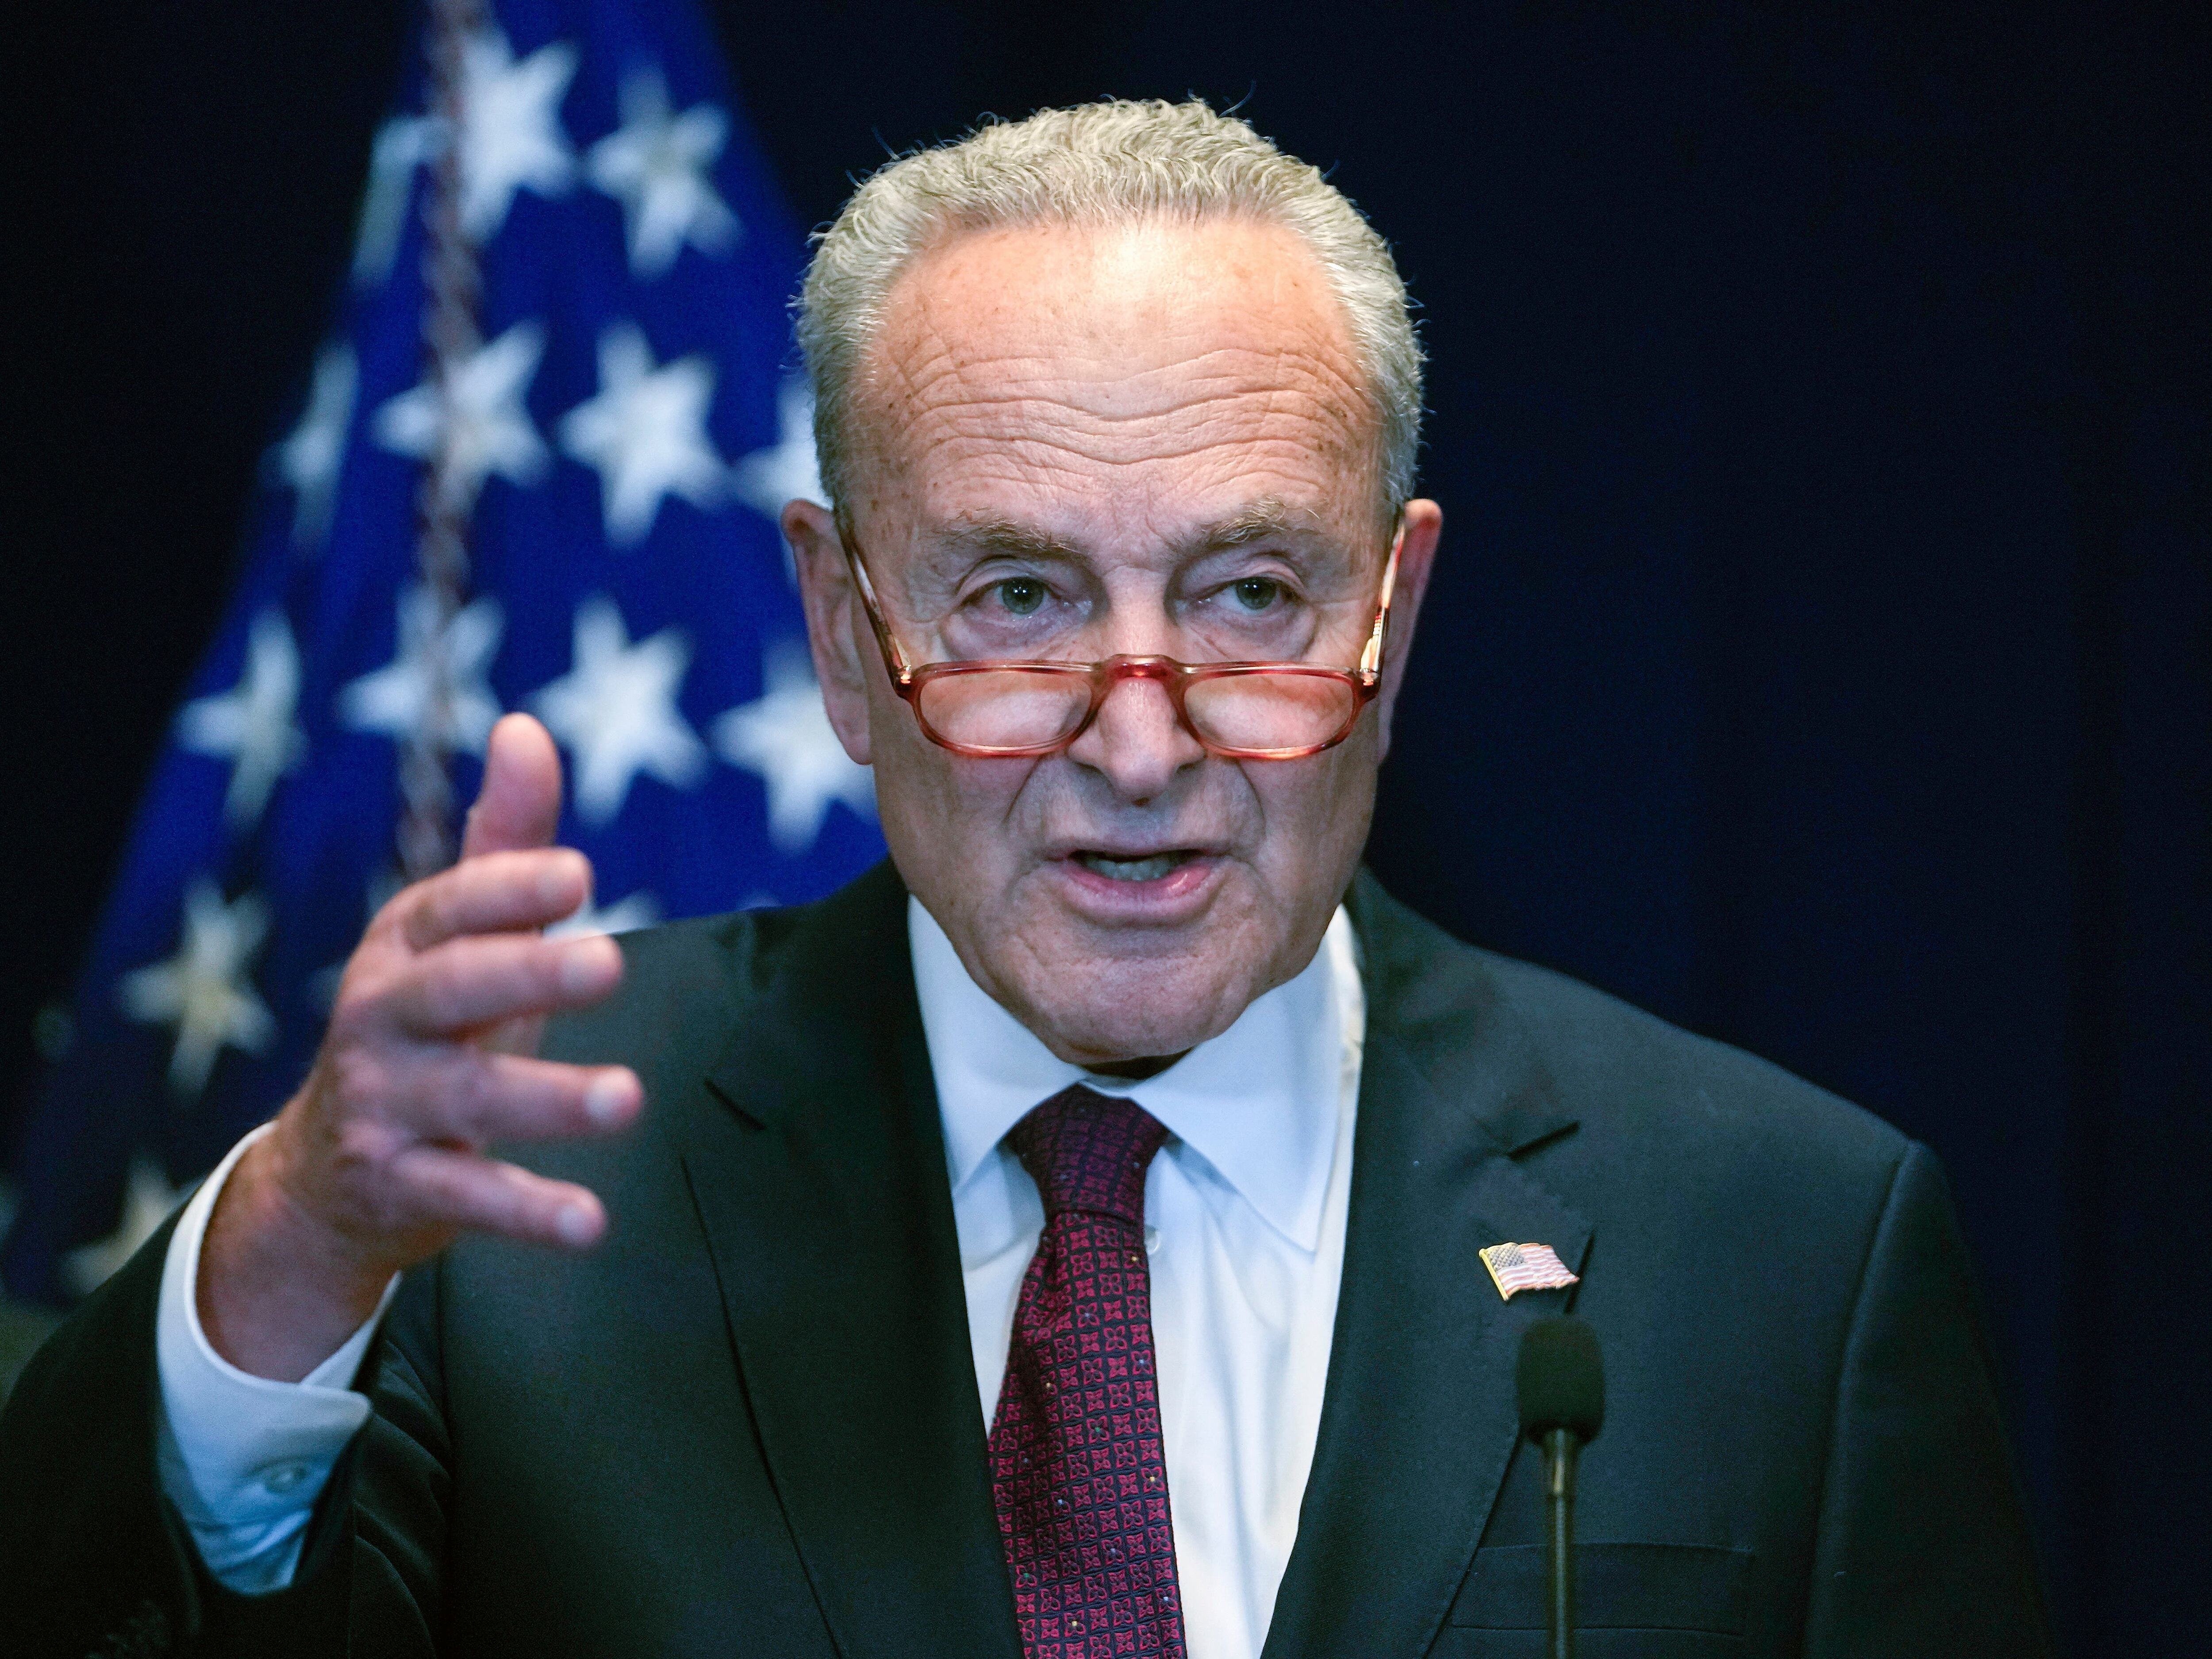 Schumer to visit Israel to show ‘unwavering’ US support